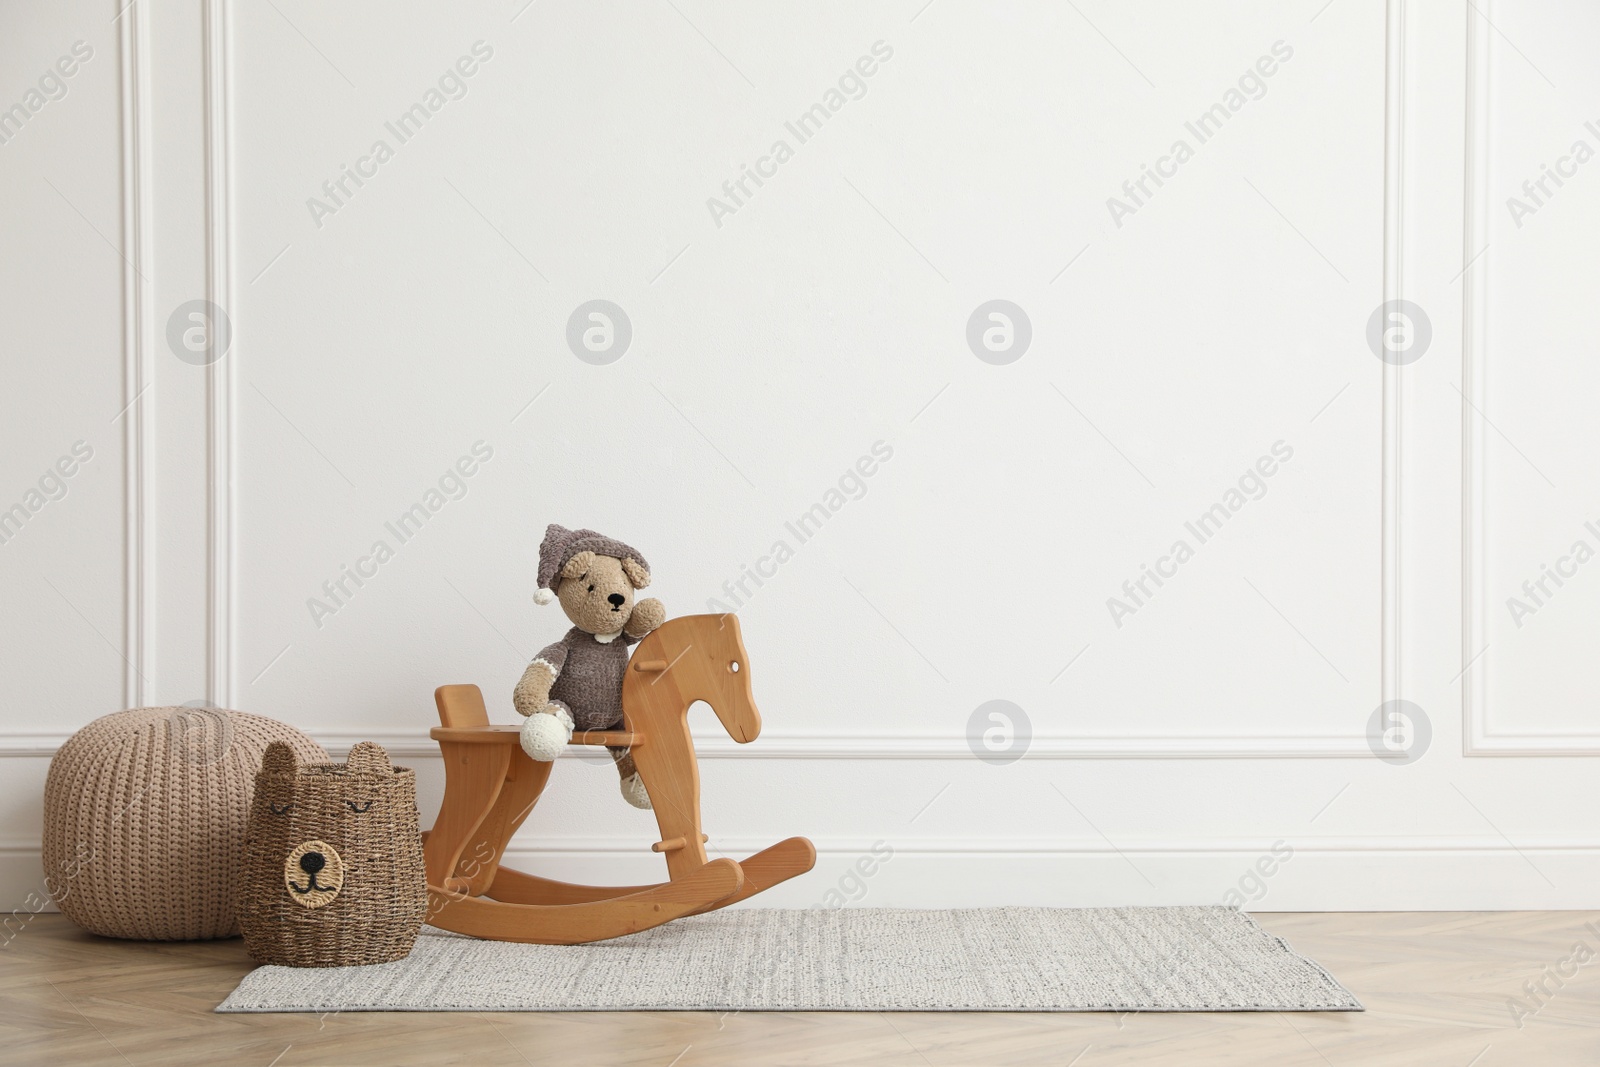 Photo of Rocking horse with bear toy, pouf and wicker basket near white wall in child room, space for text. Interior design